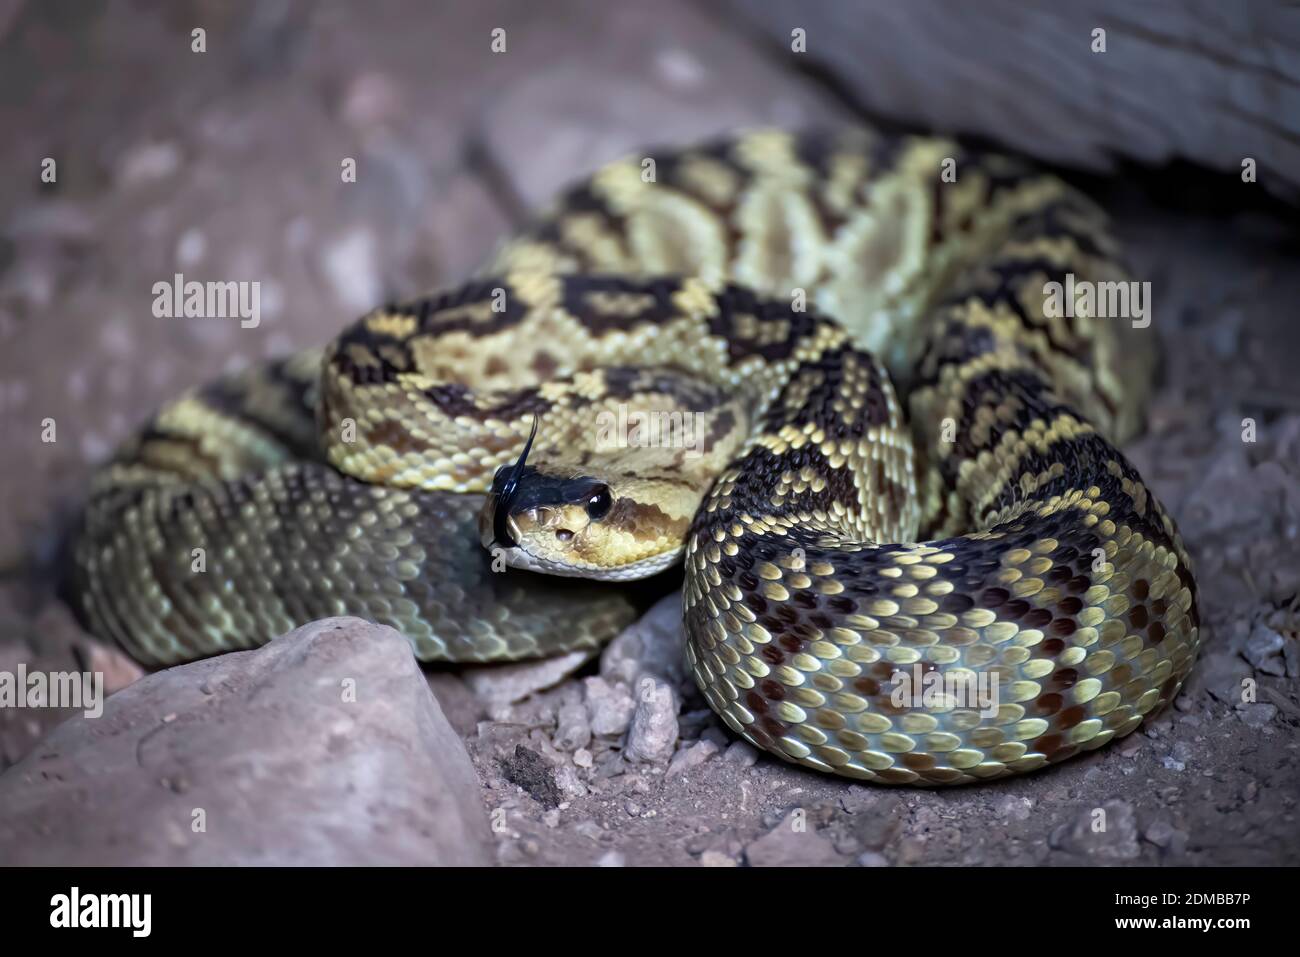 Black tailed rattlesnake coiled up with tongue out in close up low angle image from Arizona. Stock Photo